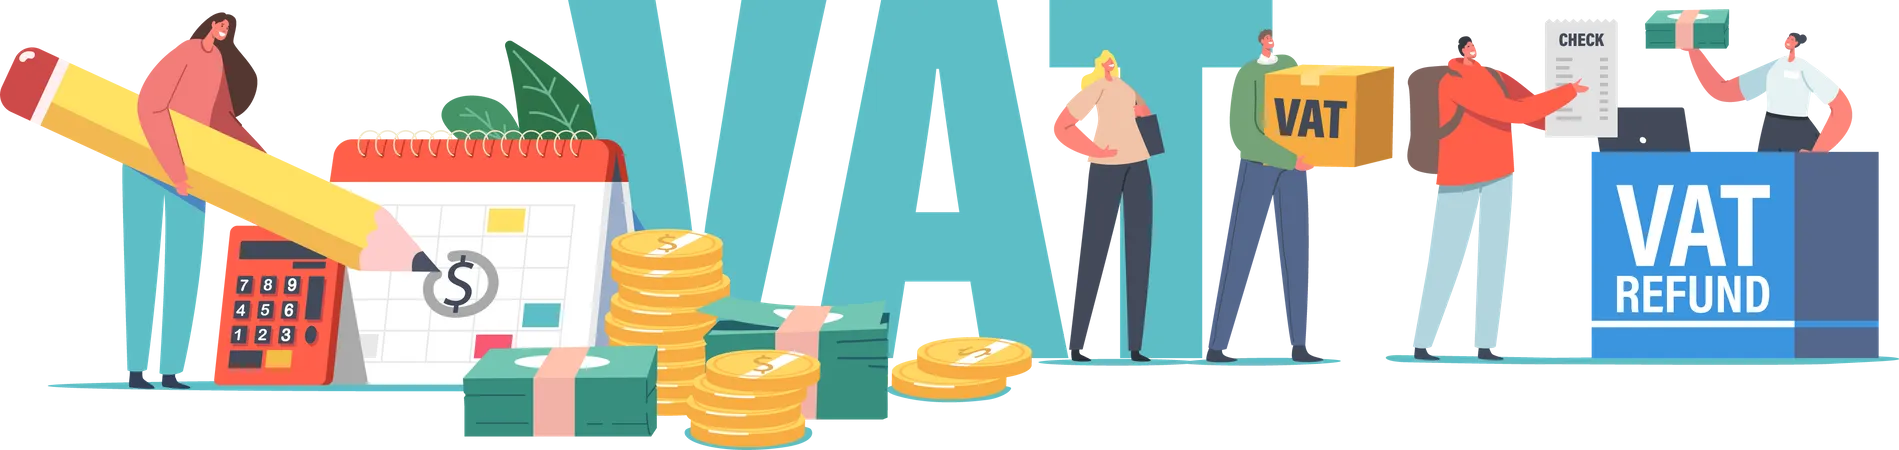 Vat Value Added Tax Return Service Concept Male Or Female Characters Getting Refund For Foreign Shopping People Save Budget Get Money Tax Free At Airport Desk Cartoon Vector People Illustration Illustration